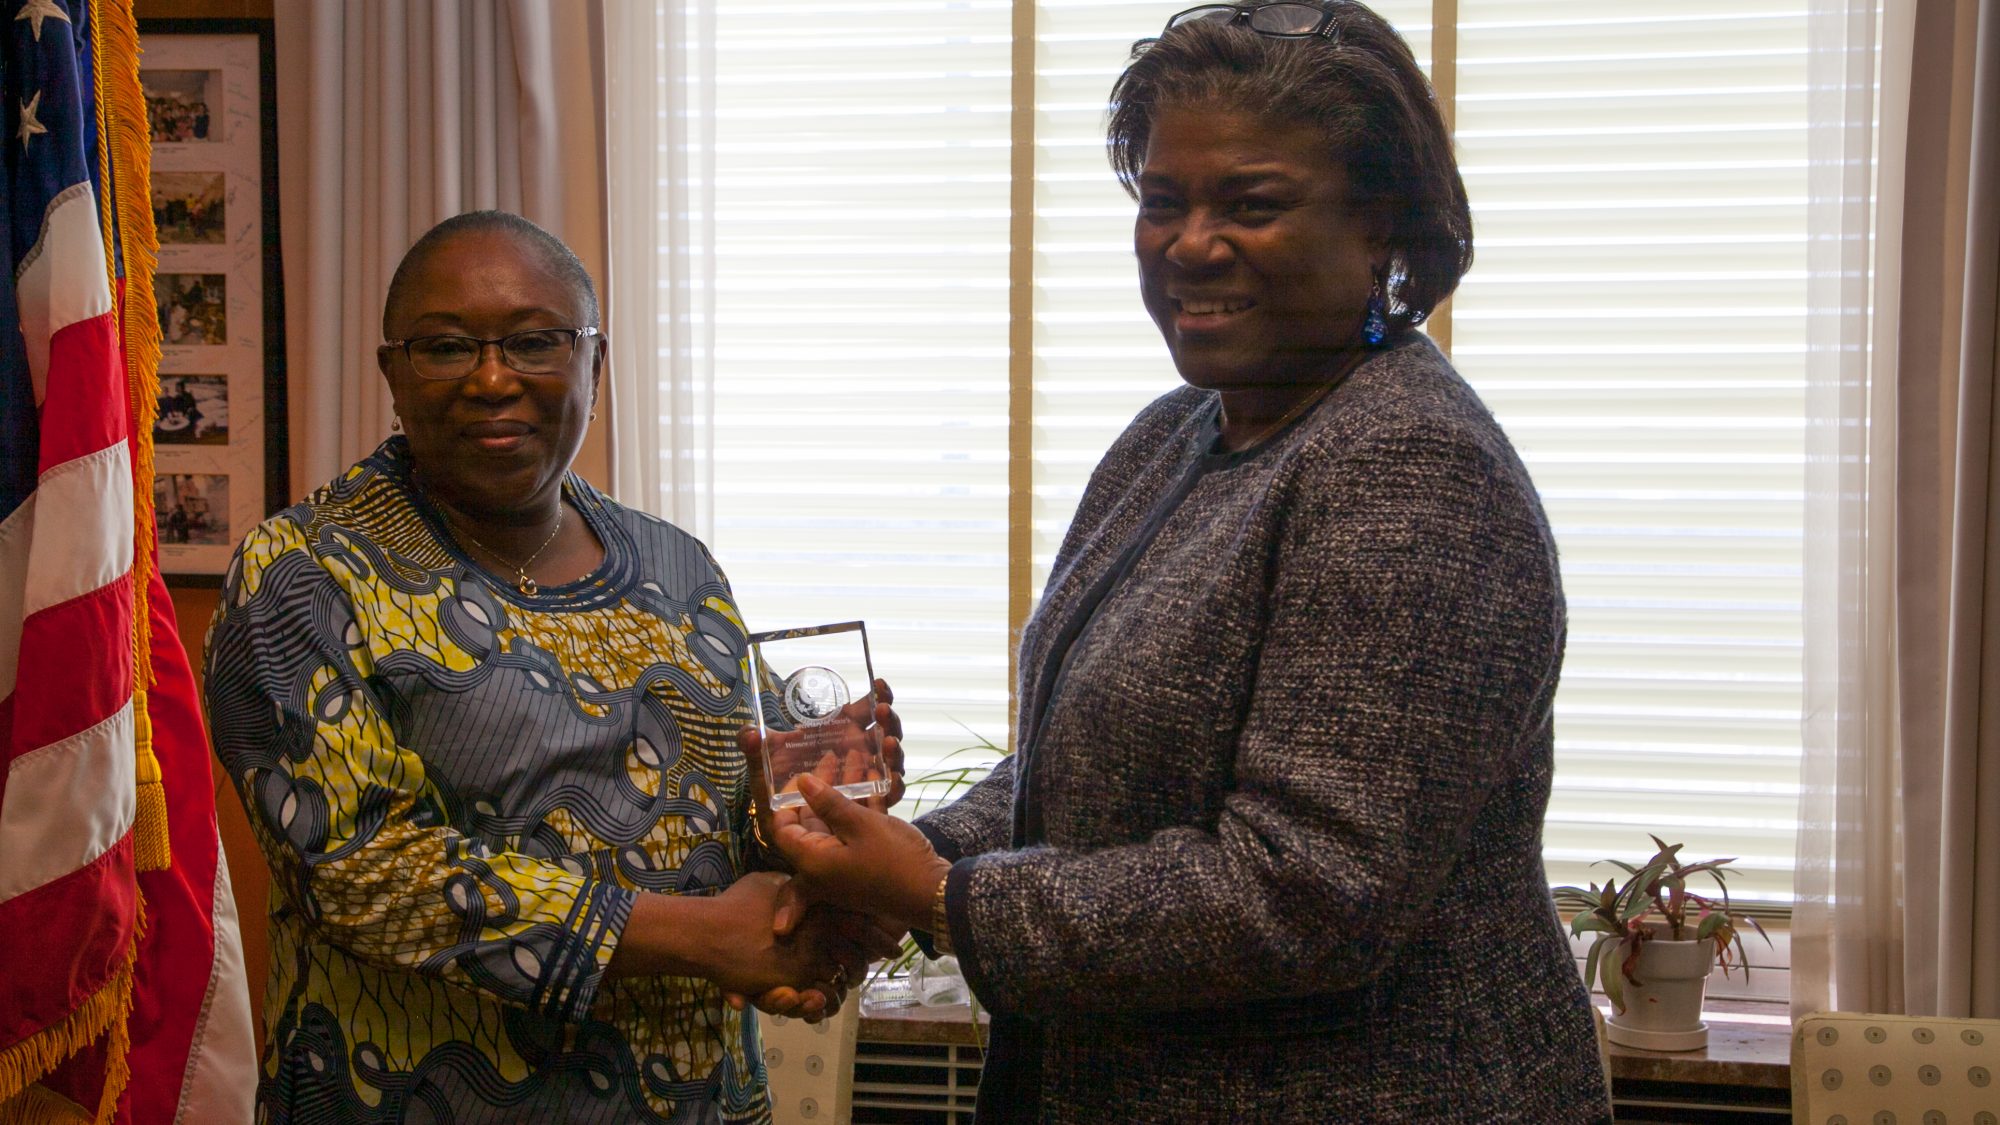 Assistant Secretary Linda Thomas-Greenfield who leads the Department of State&#039;s Bureau of African Affairs, gives International Women of Courage Award to Beatrice Epaye President, Fondation Voix du Coeur from Central African Republic